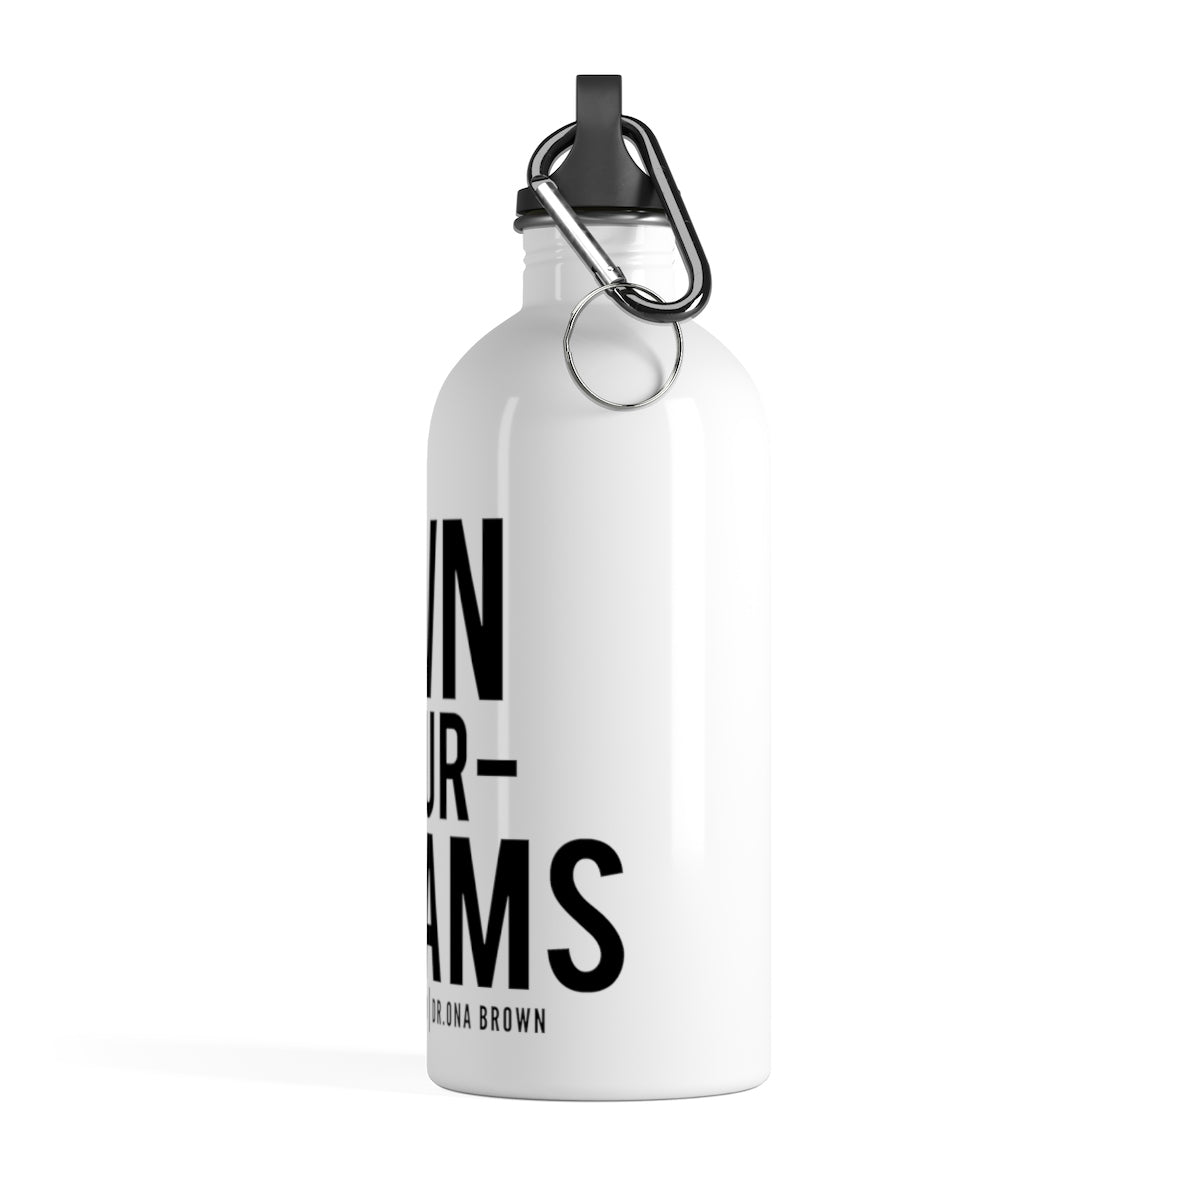 "Own Your Dreams" Stainless Steel Water Bottle